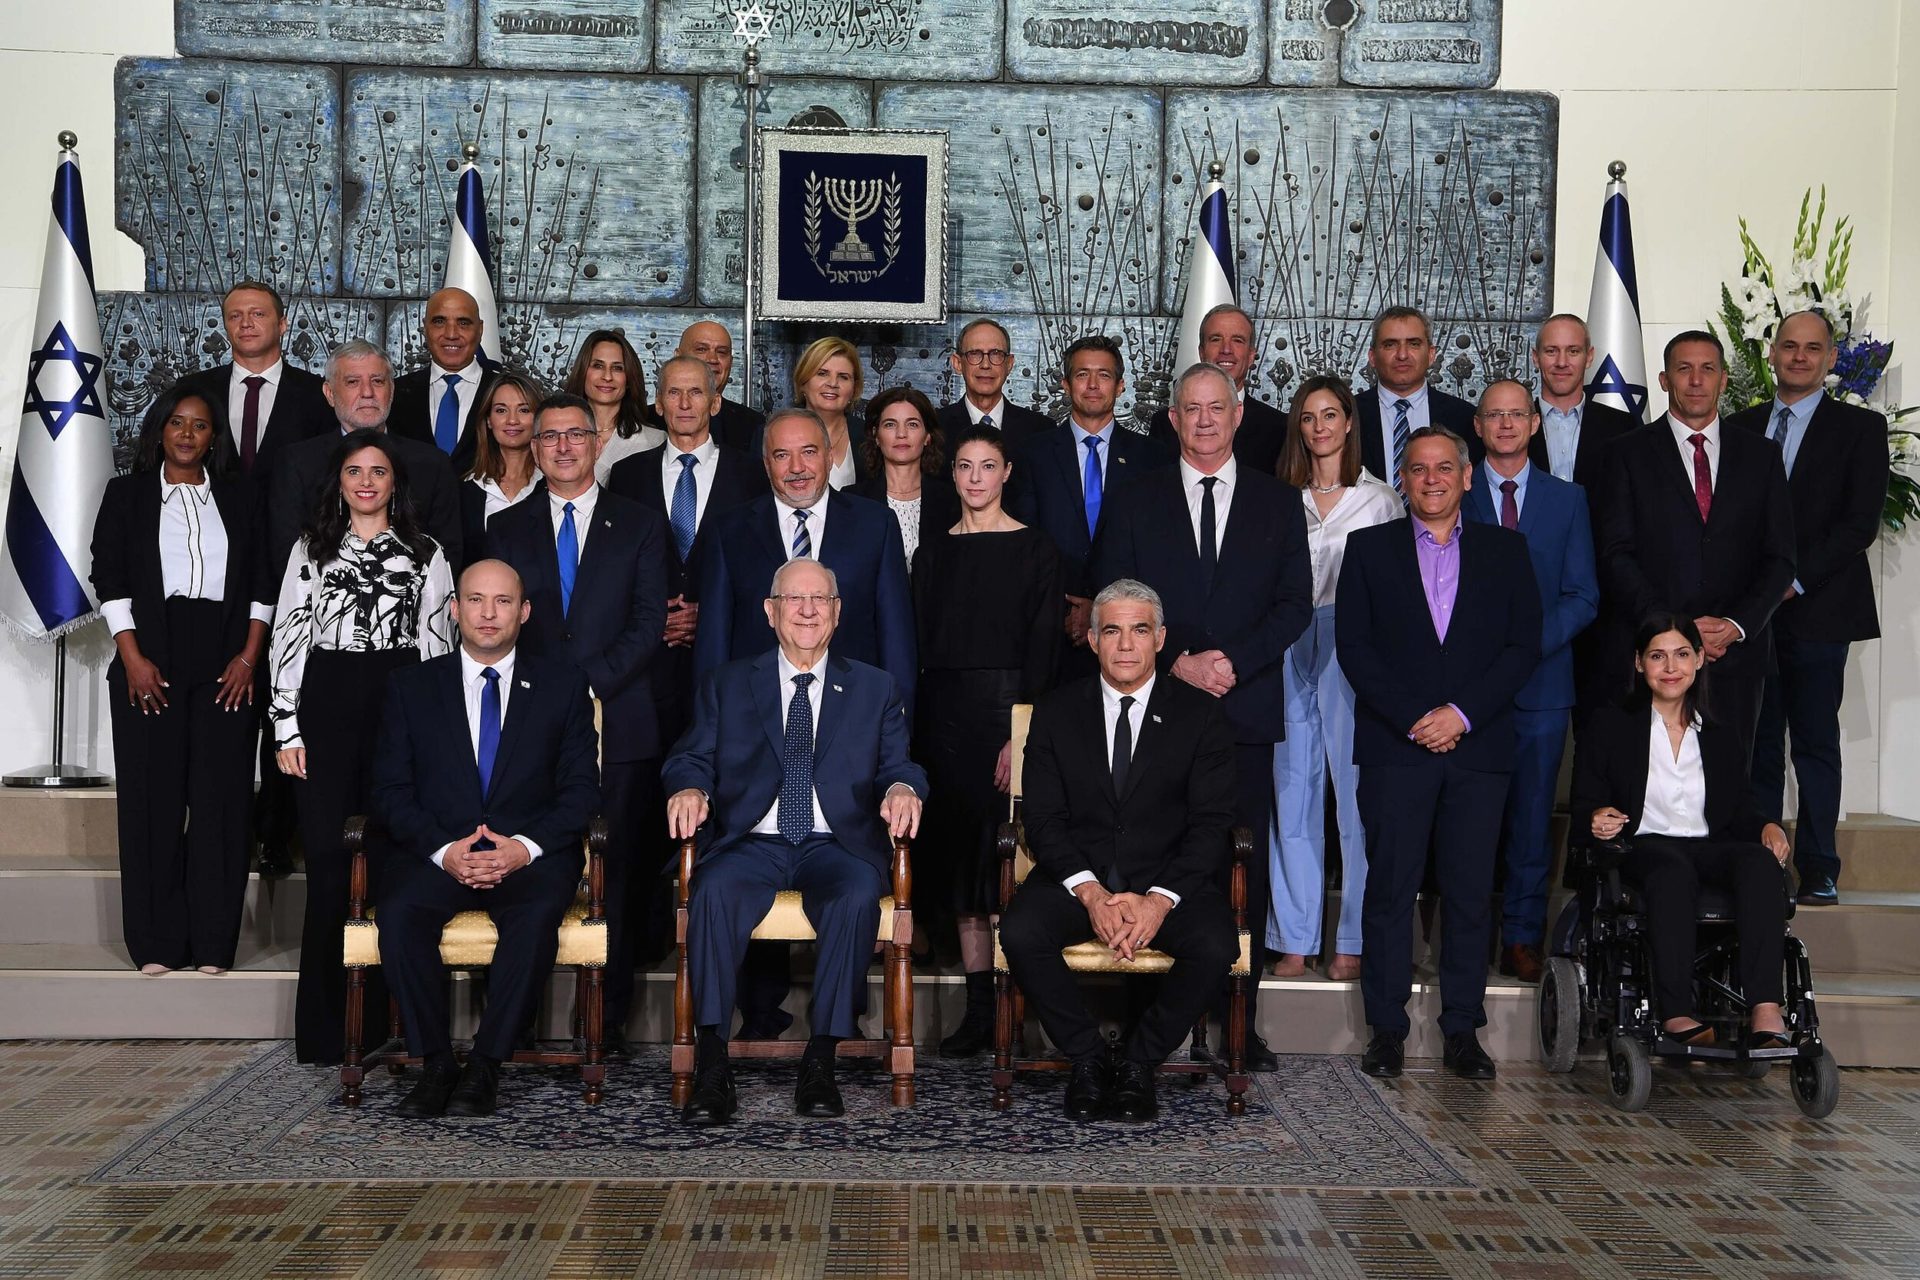 June 14, 2021 – Thirty-sixth government of Israel at Beit HaNassi to photograph the traditional picture headed by the President of Israel, Reuven Rivlin. (Photo by Haim Tzach | Wikimedia Commons)